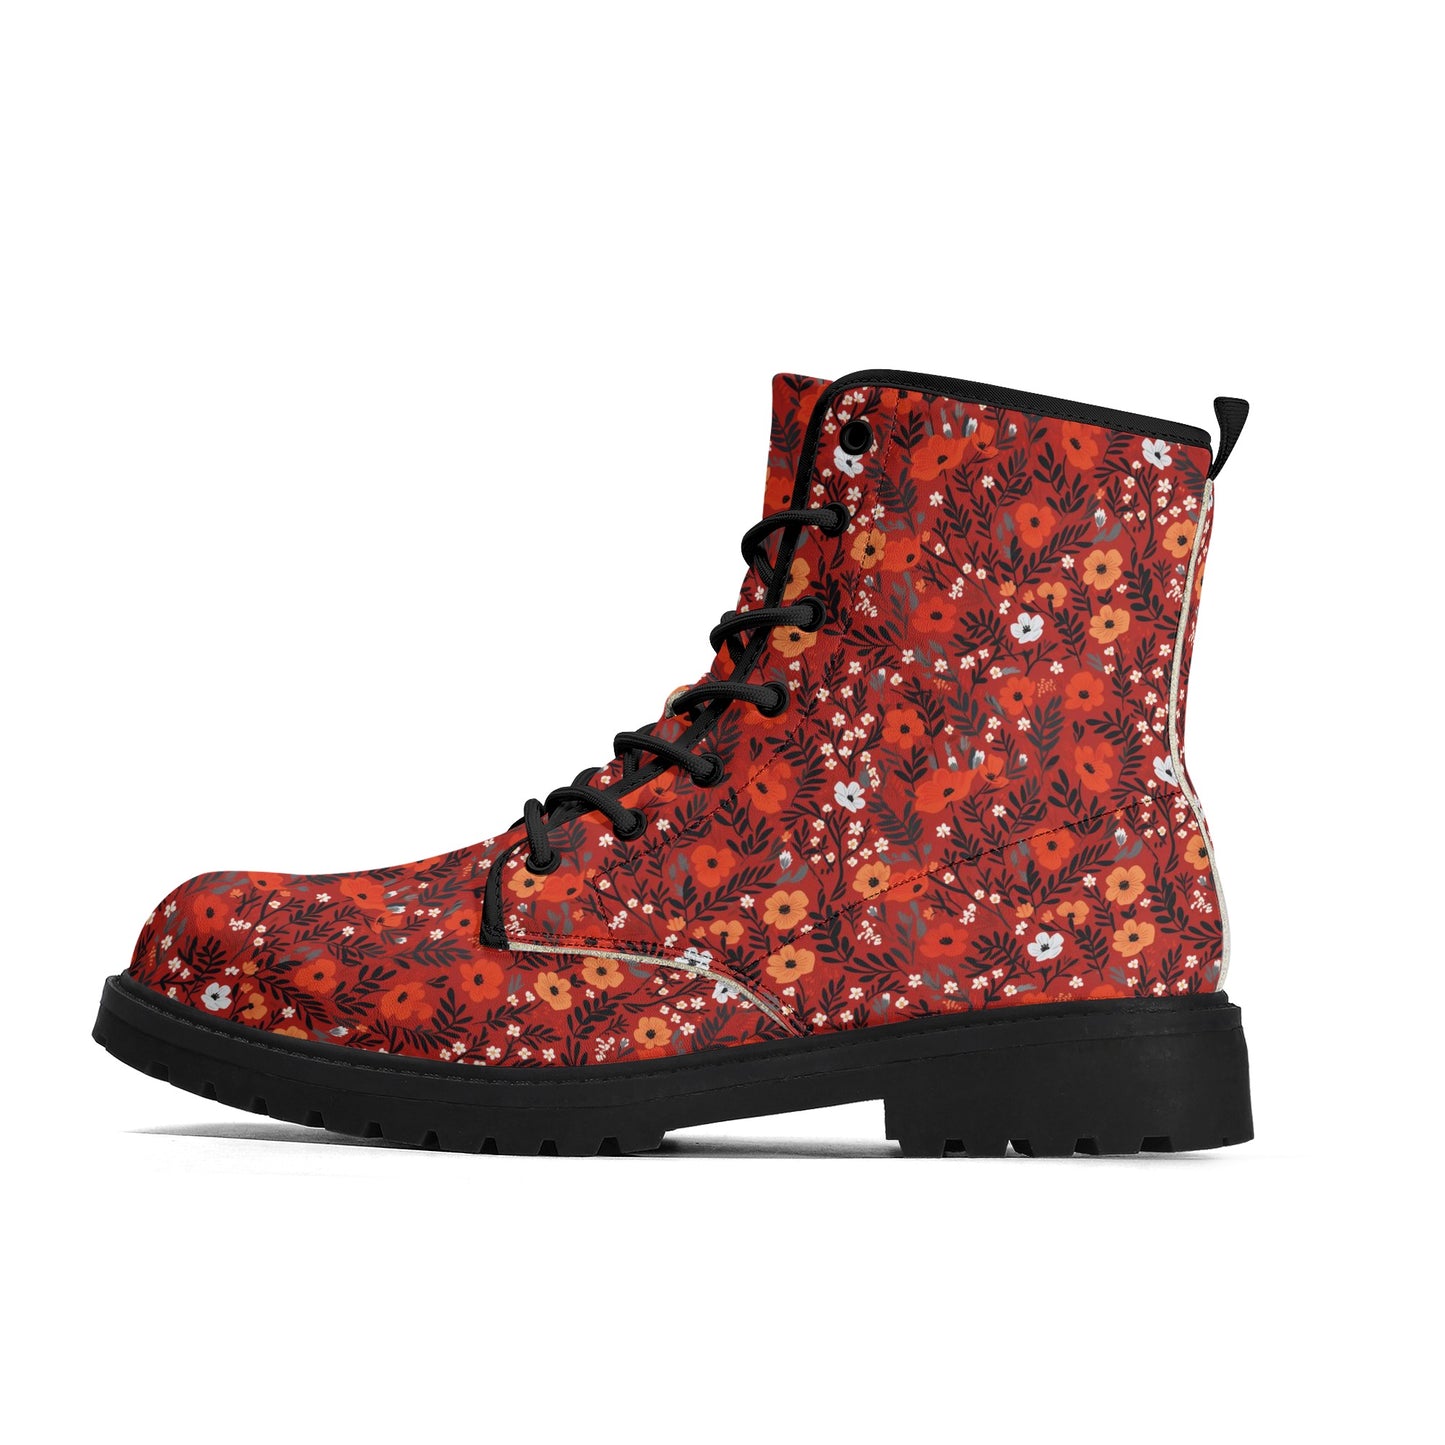 Red Floral Women Leather Boots, Flowers Vegan Lace Up Shoes Hiking Festival Black Ankle Combat Work Winter Waterproof Custom Ladies